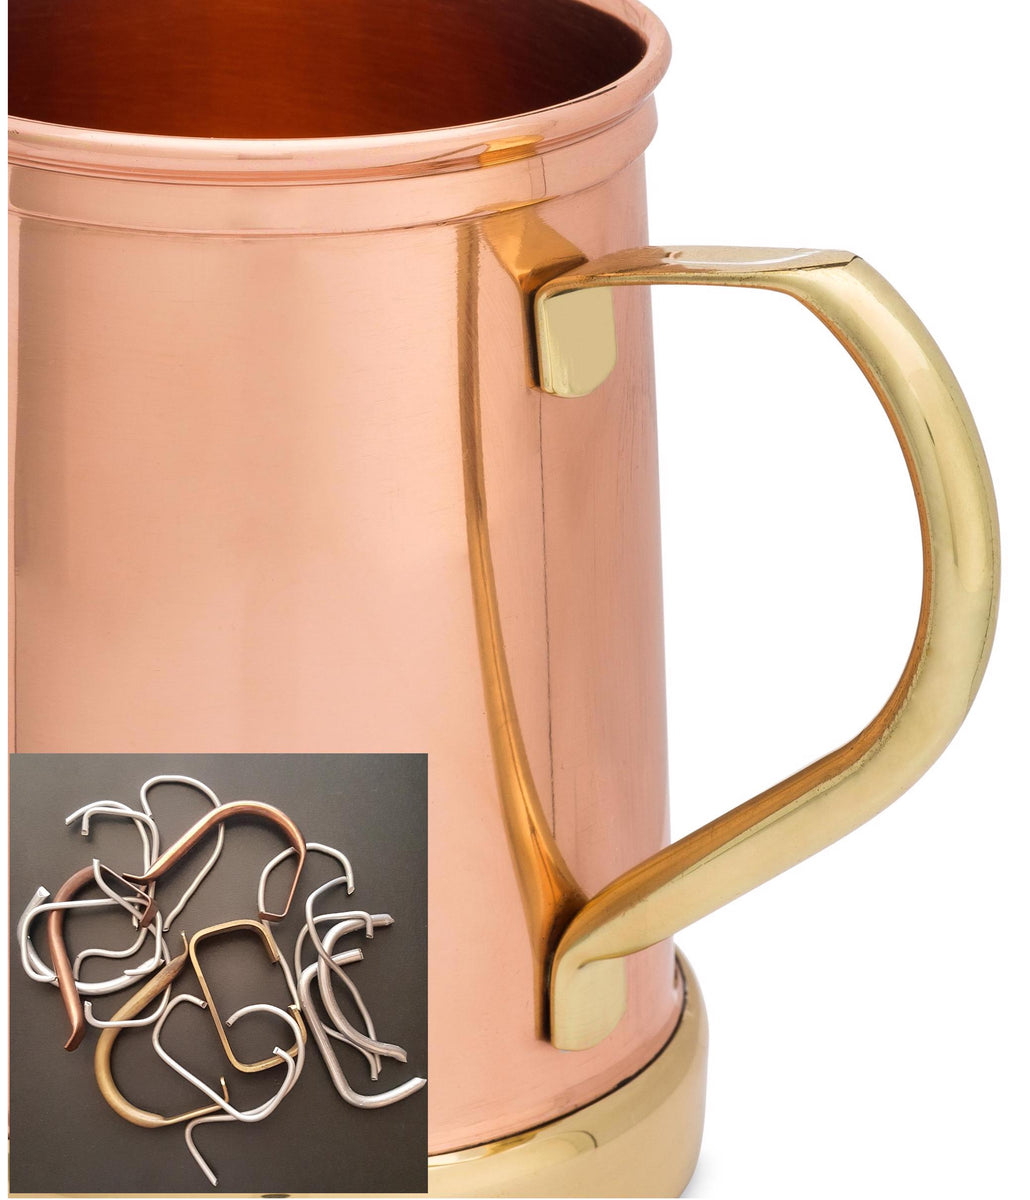 Oakland Living Solid Straight Pair of 100% Copper Mule Mug Cups with Straws 16 oz Hammered Handcrafted 5.5 L x 3.25 W x 4 H